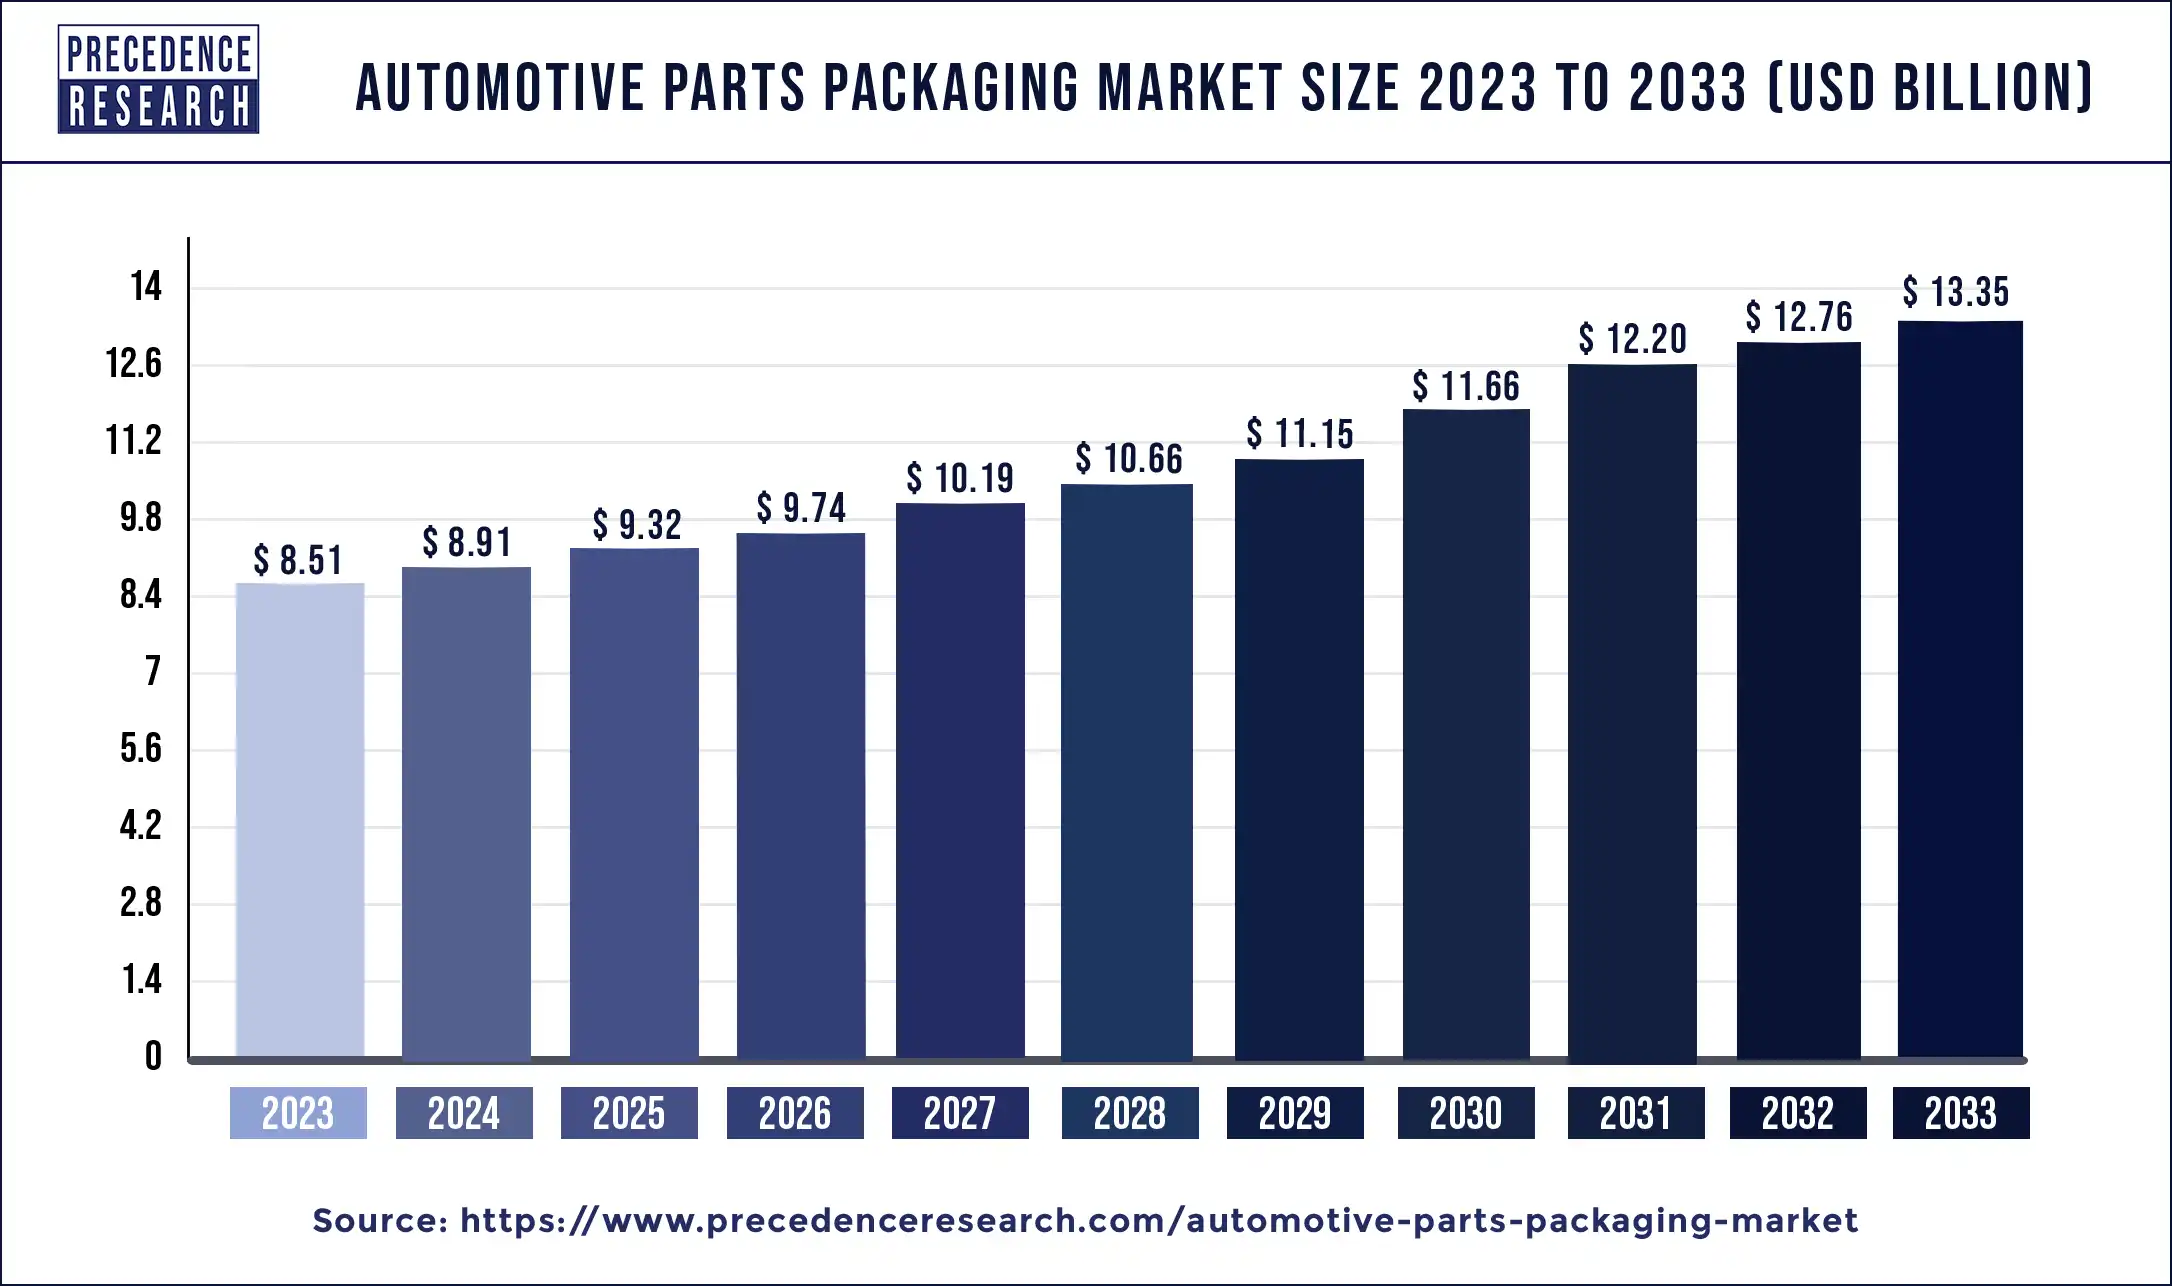 Automotive Parts Packaging Market Size 2024 to 2033